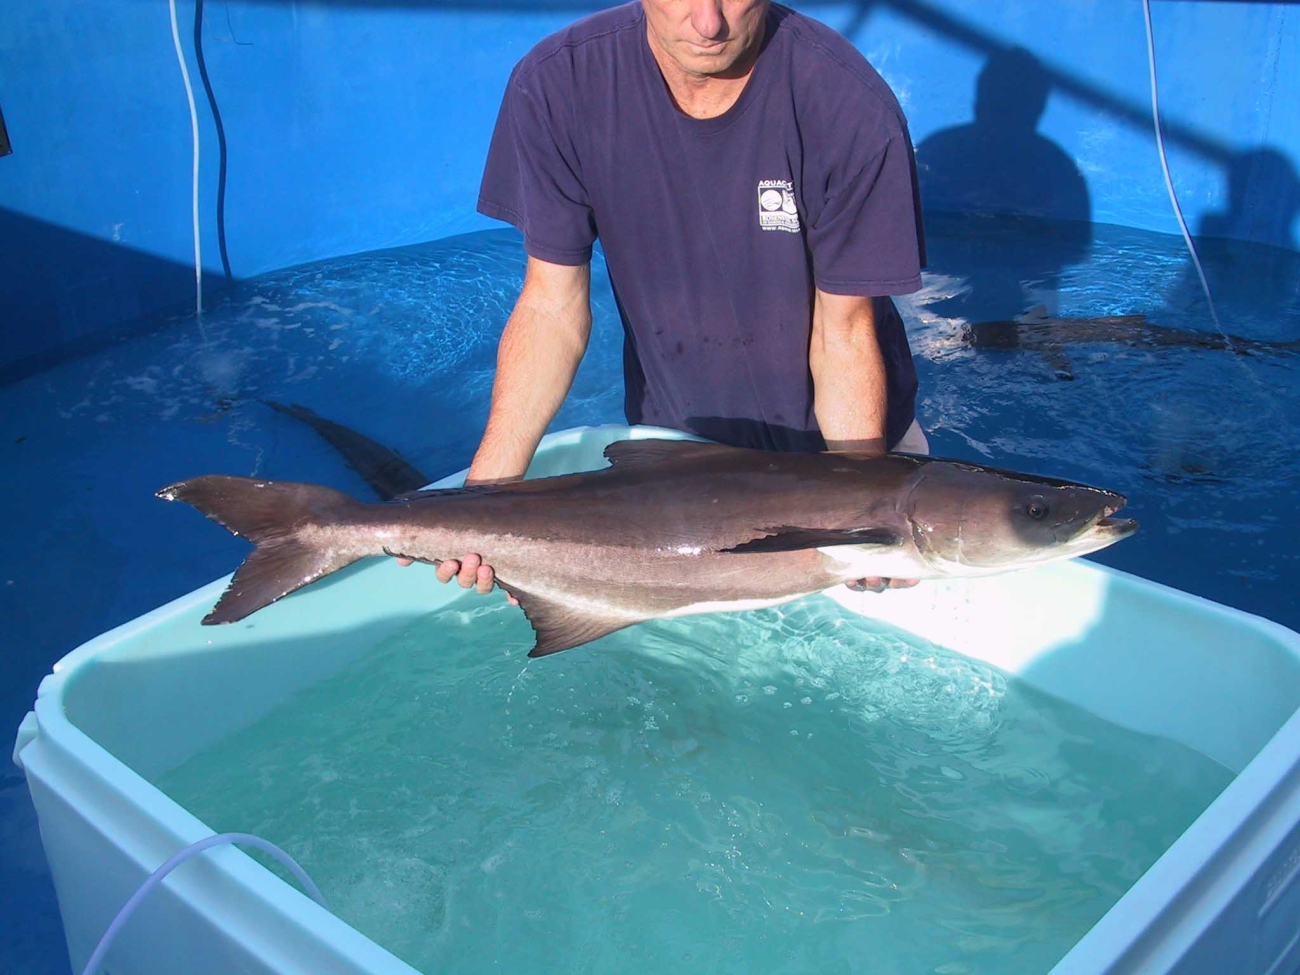 Cobia male broodstock weighing approximately 20 kilograms being heldprior to transport to brookstock tanks